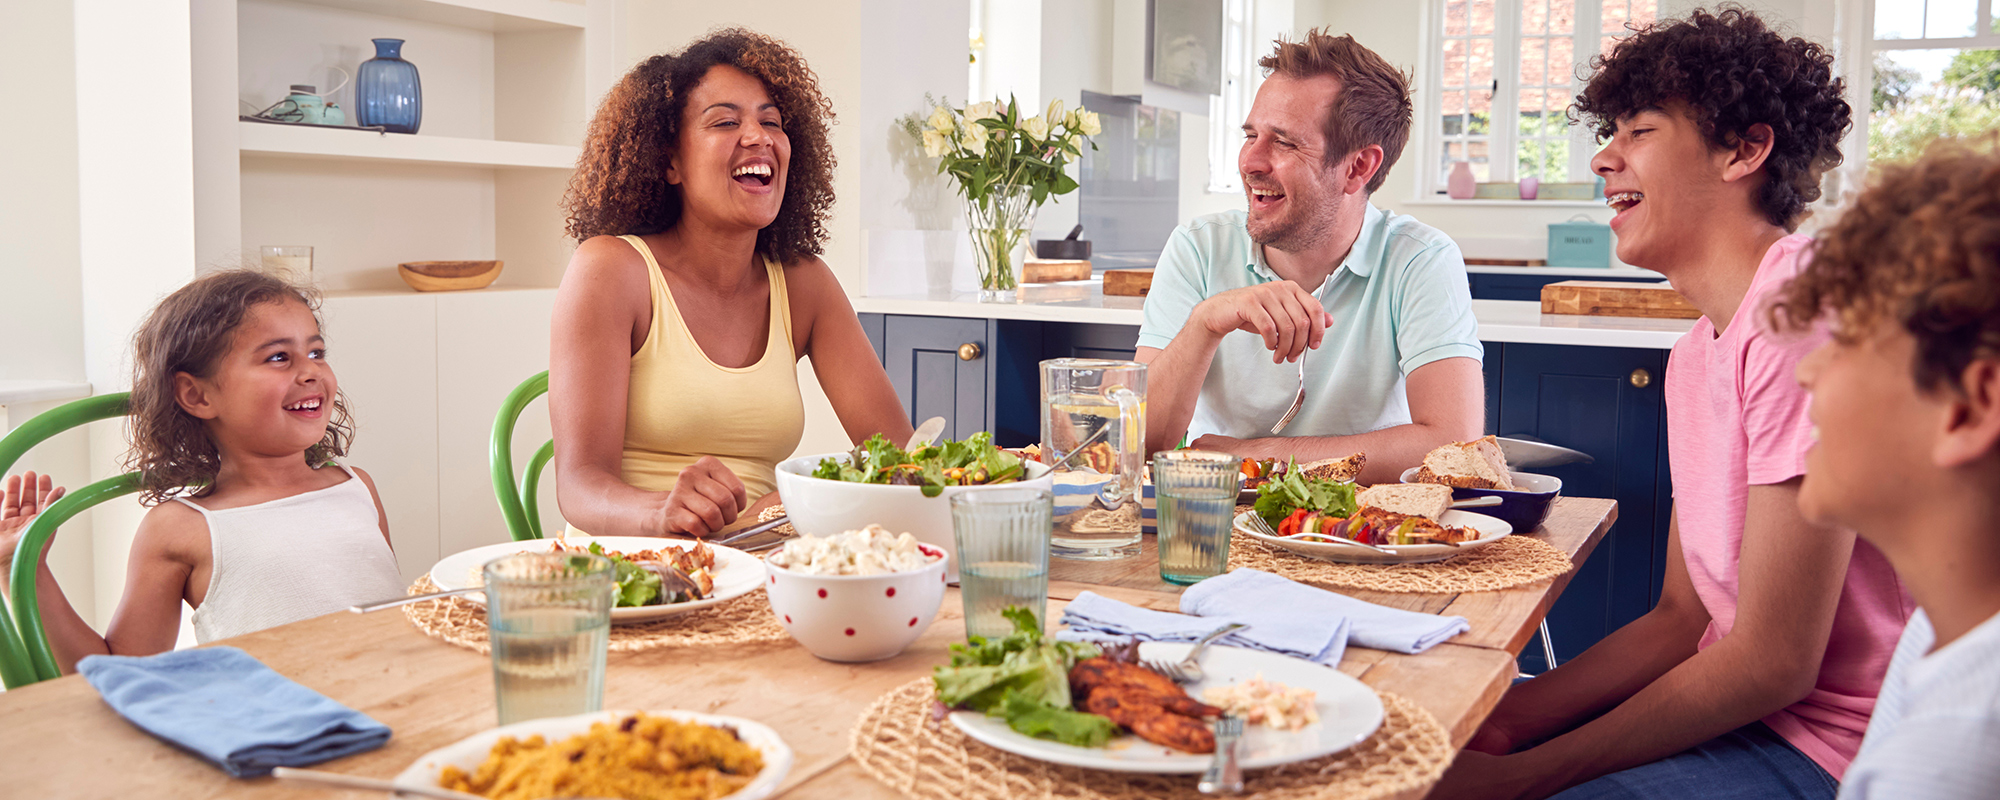 multi racial family sitting around a dinner table eating their dinner laughing and smiling together with no digital devices on the table | Digital Wings What is Digital Wellbeing